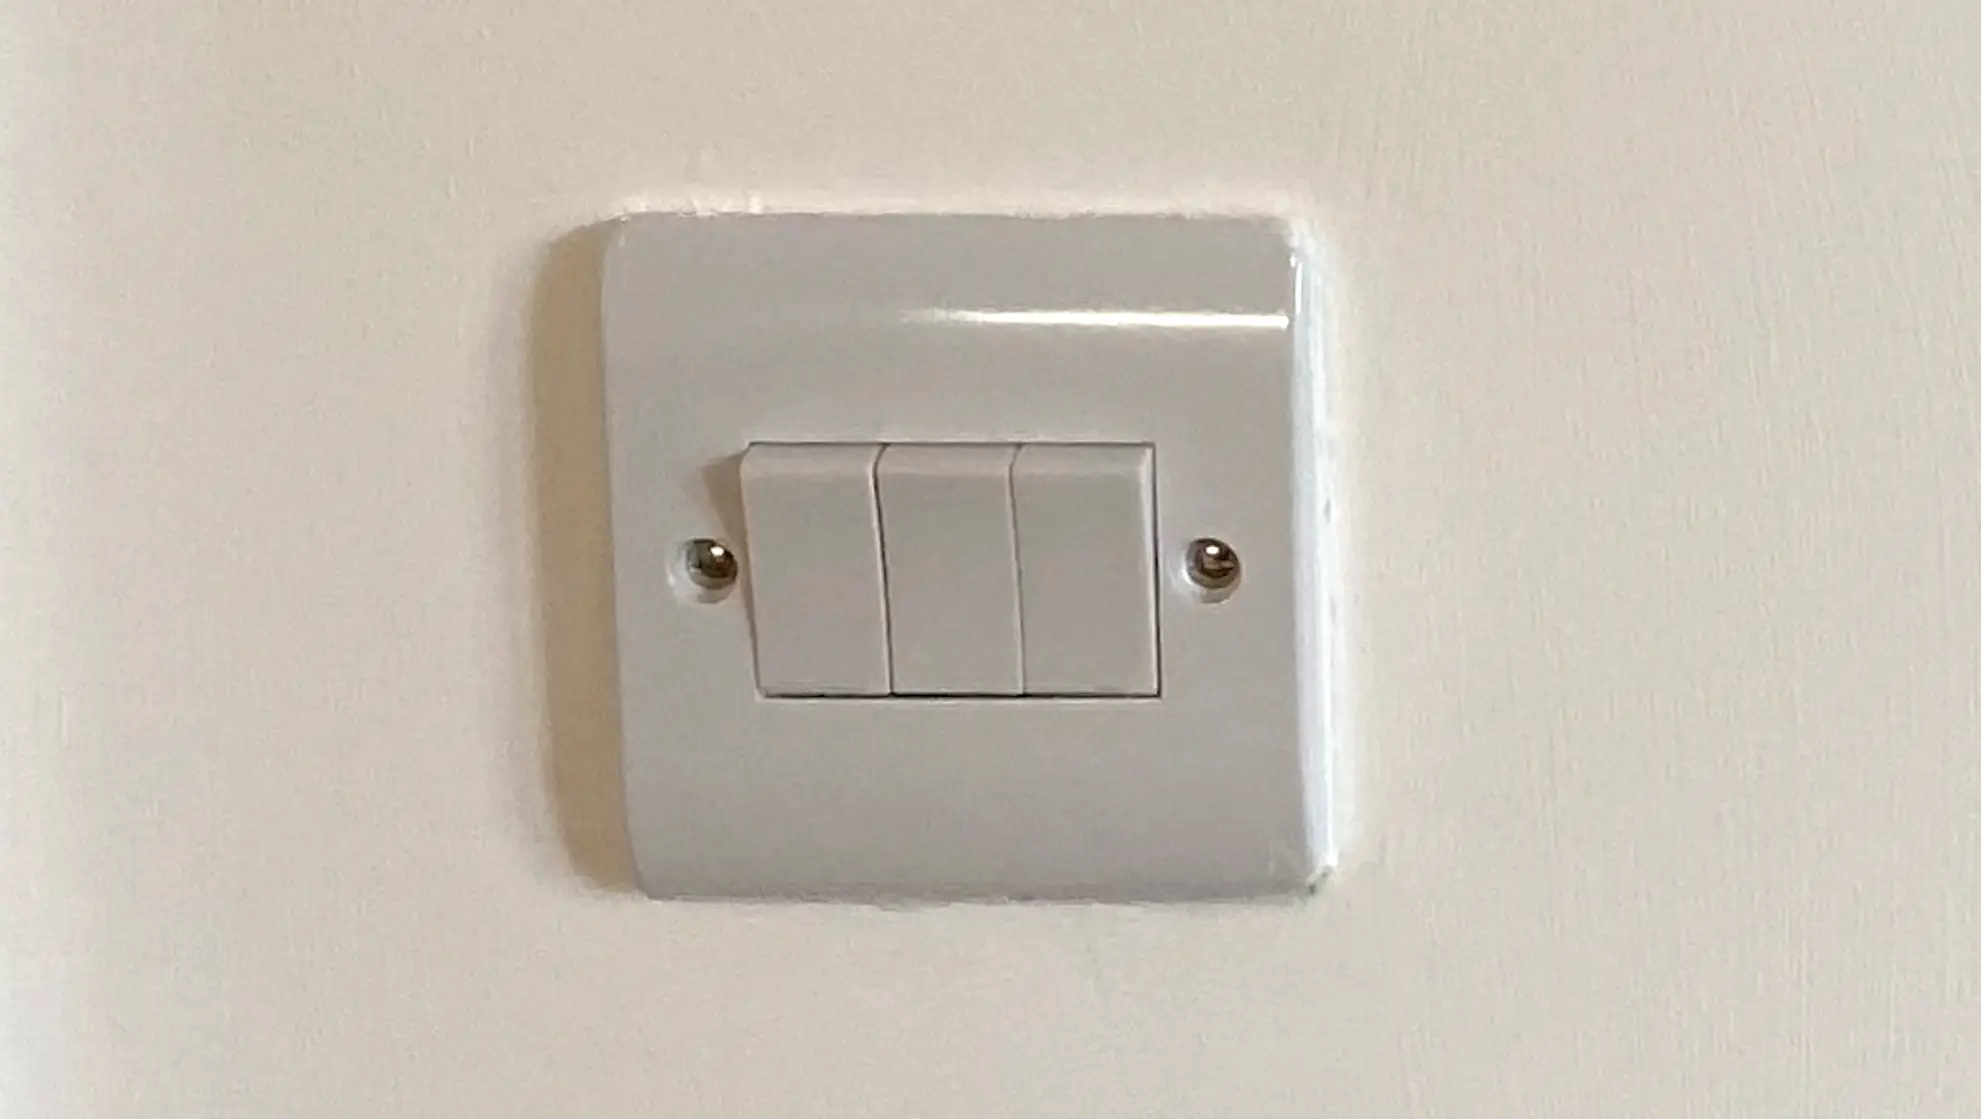 Estimates for install or fix a light switch near Deptford